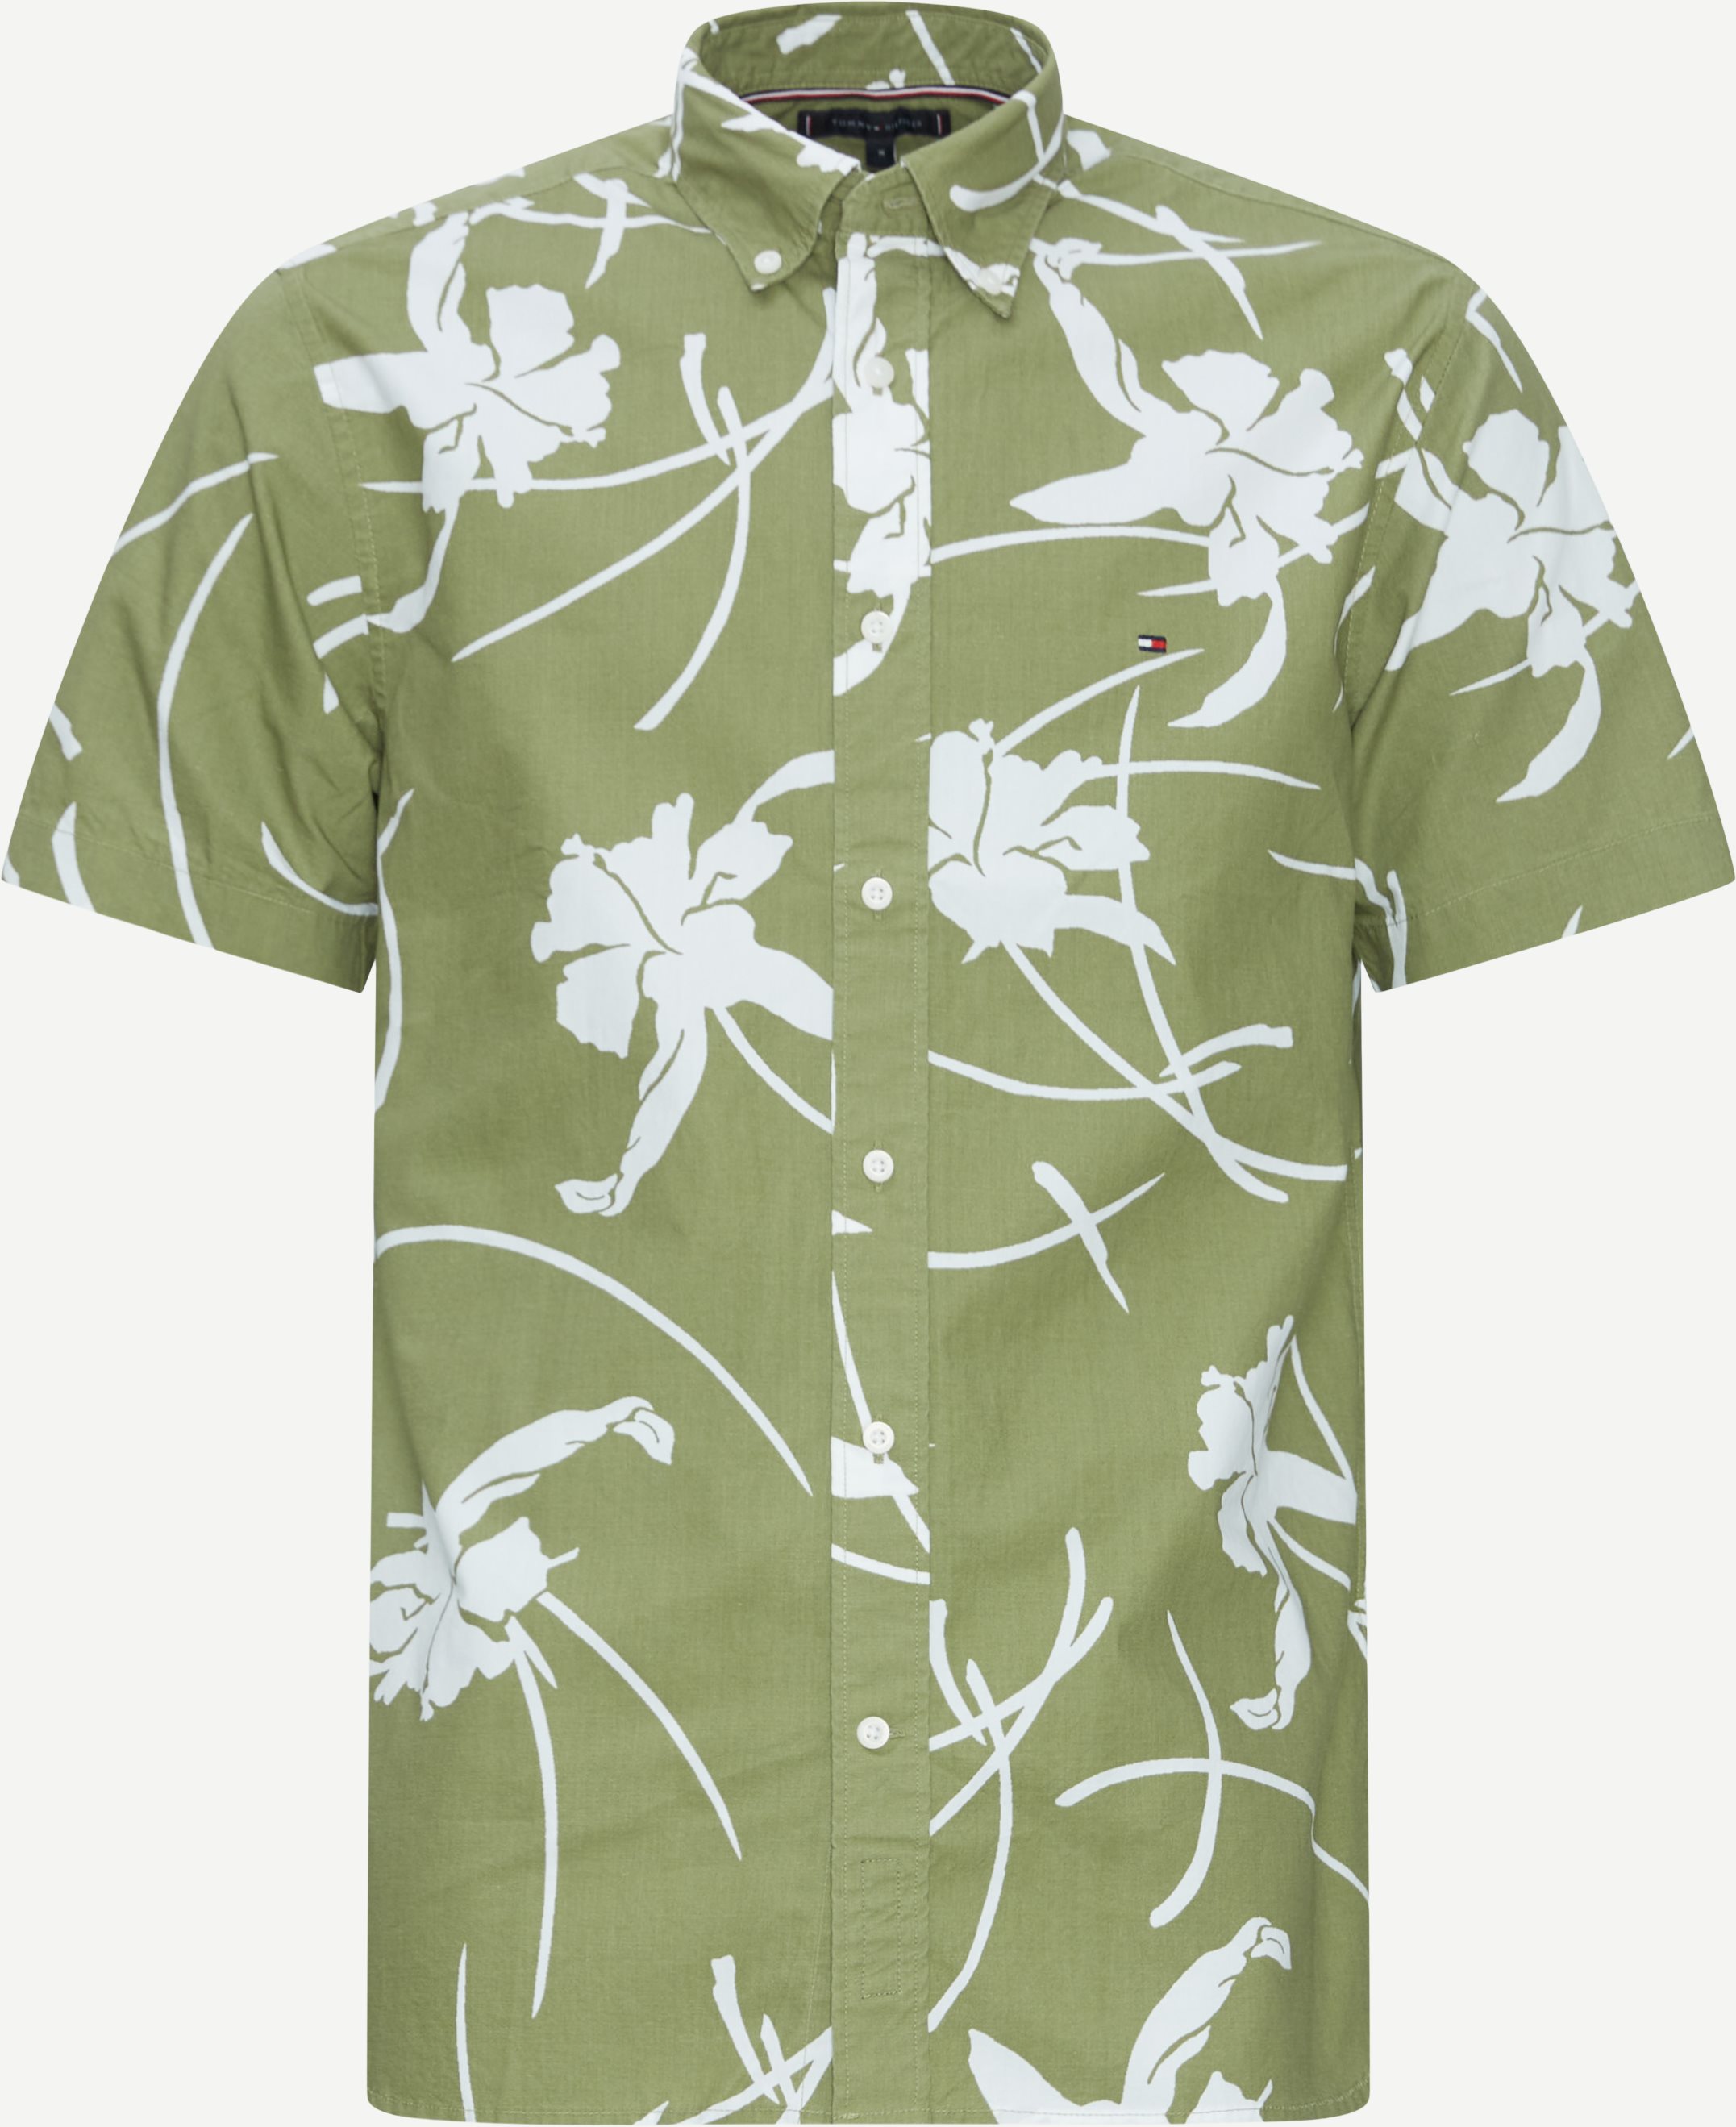 Tommy Hilfiger Short-sleeved shirts 34587 LARGE TROPICAL PRT SHIRT S/S Army